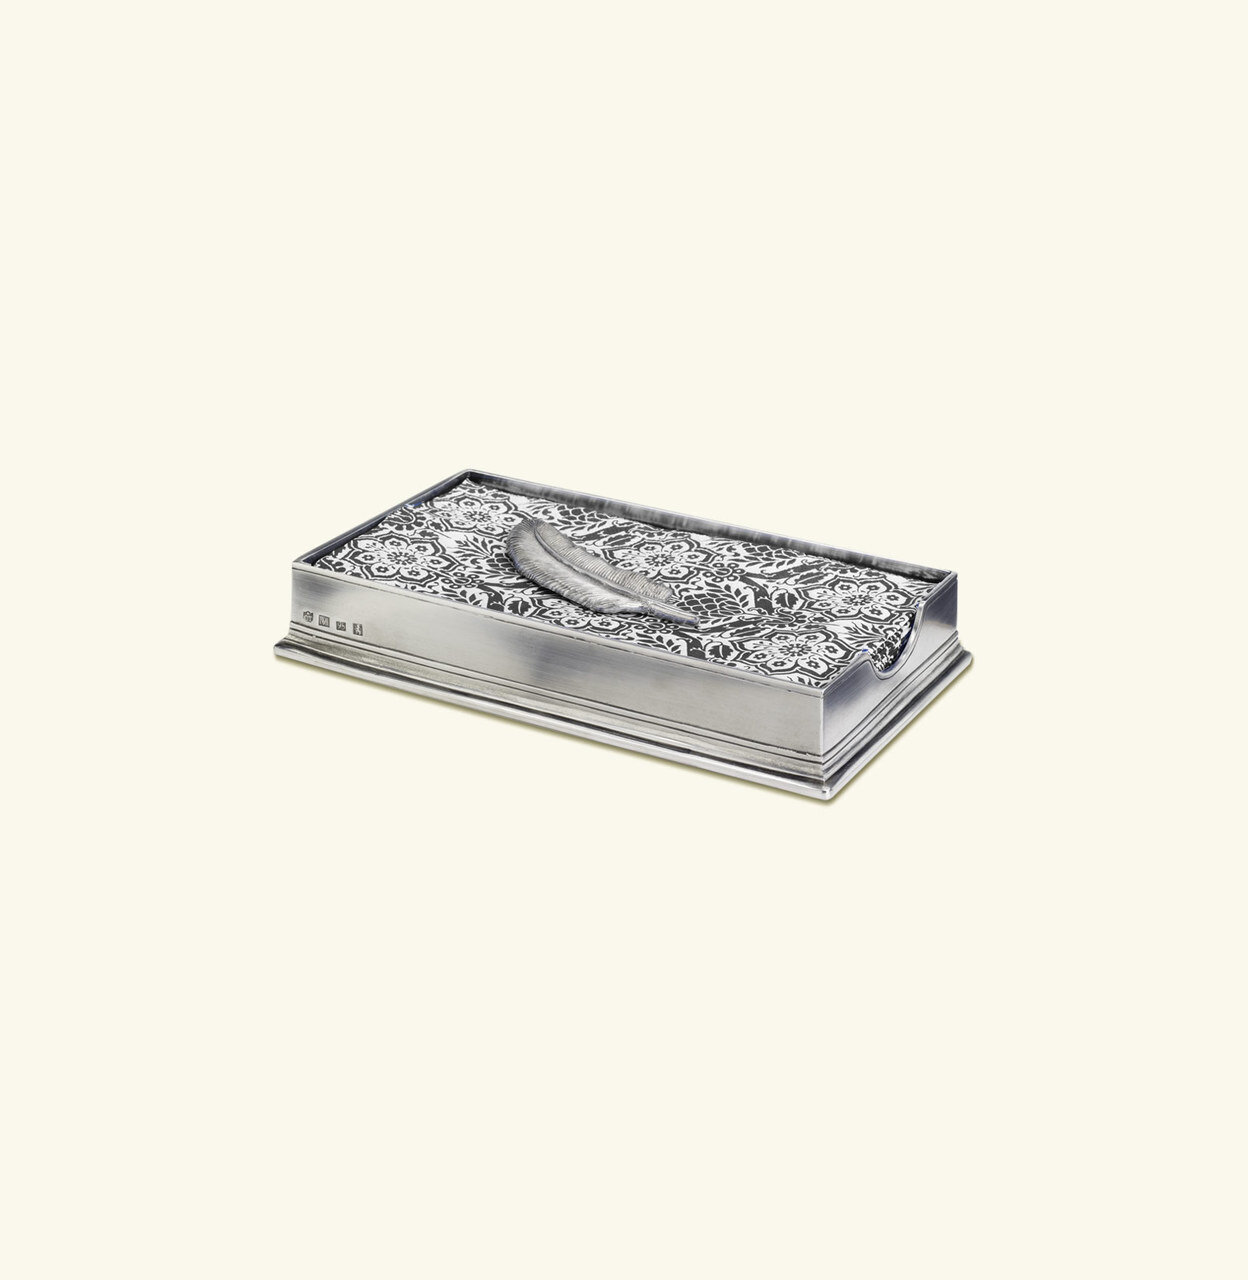 Match Pewter Dinner Napkin/Guest Towel Box With Feather Weight 1284.2